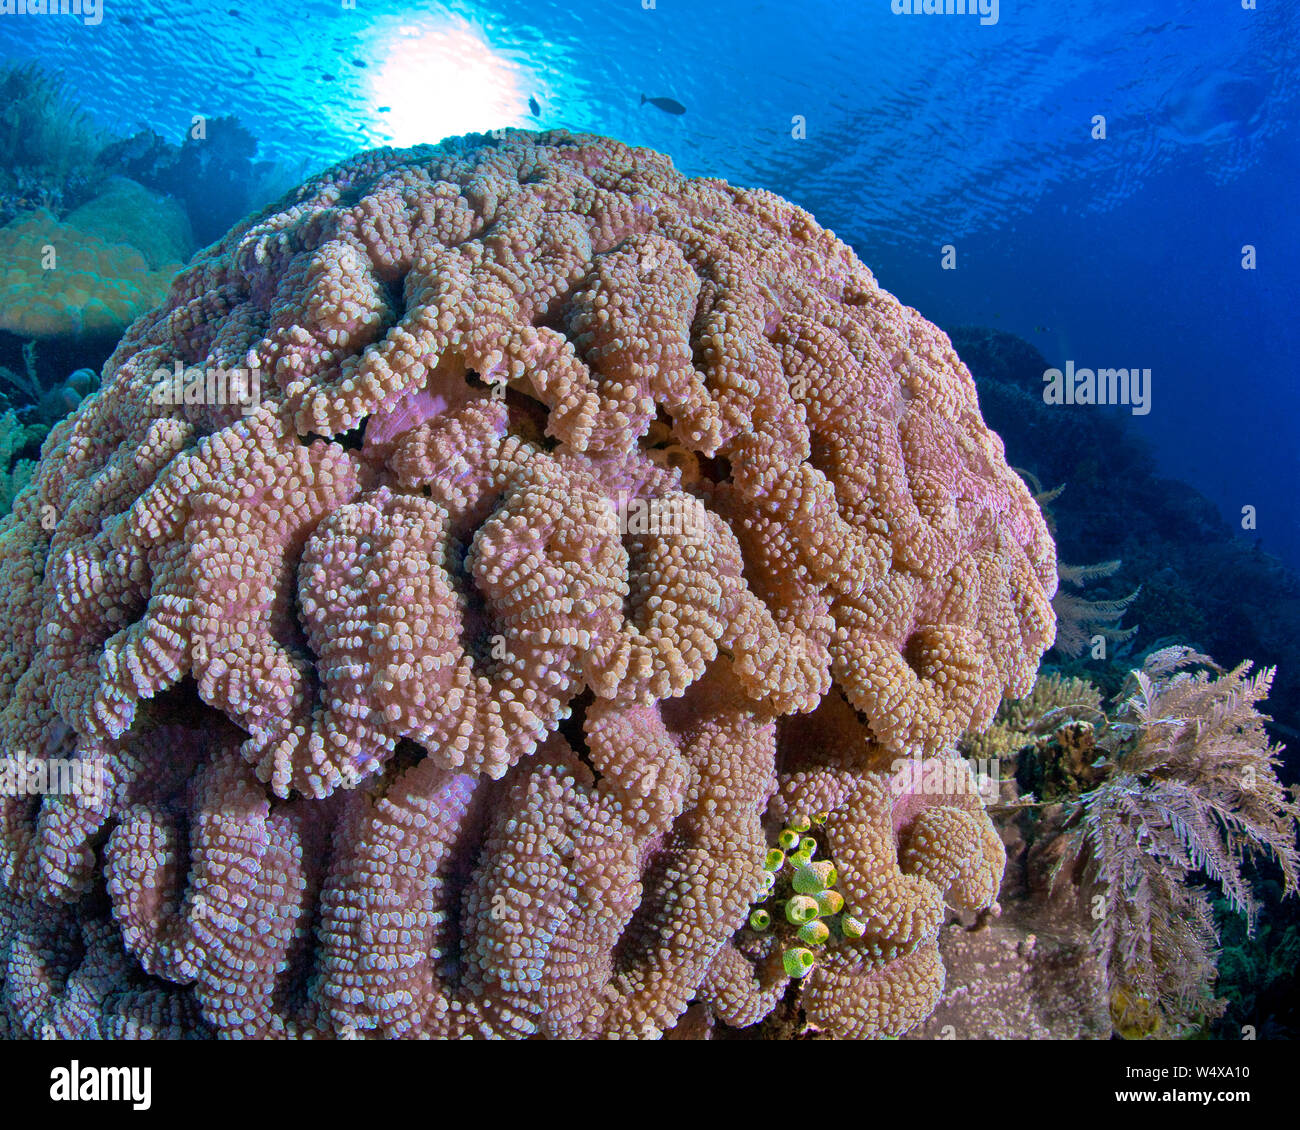 Close focus wide-angle view of colorful lobophyllia brain coral on a reef in Bunaken Island, Indonesia. Stock Photo